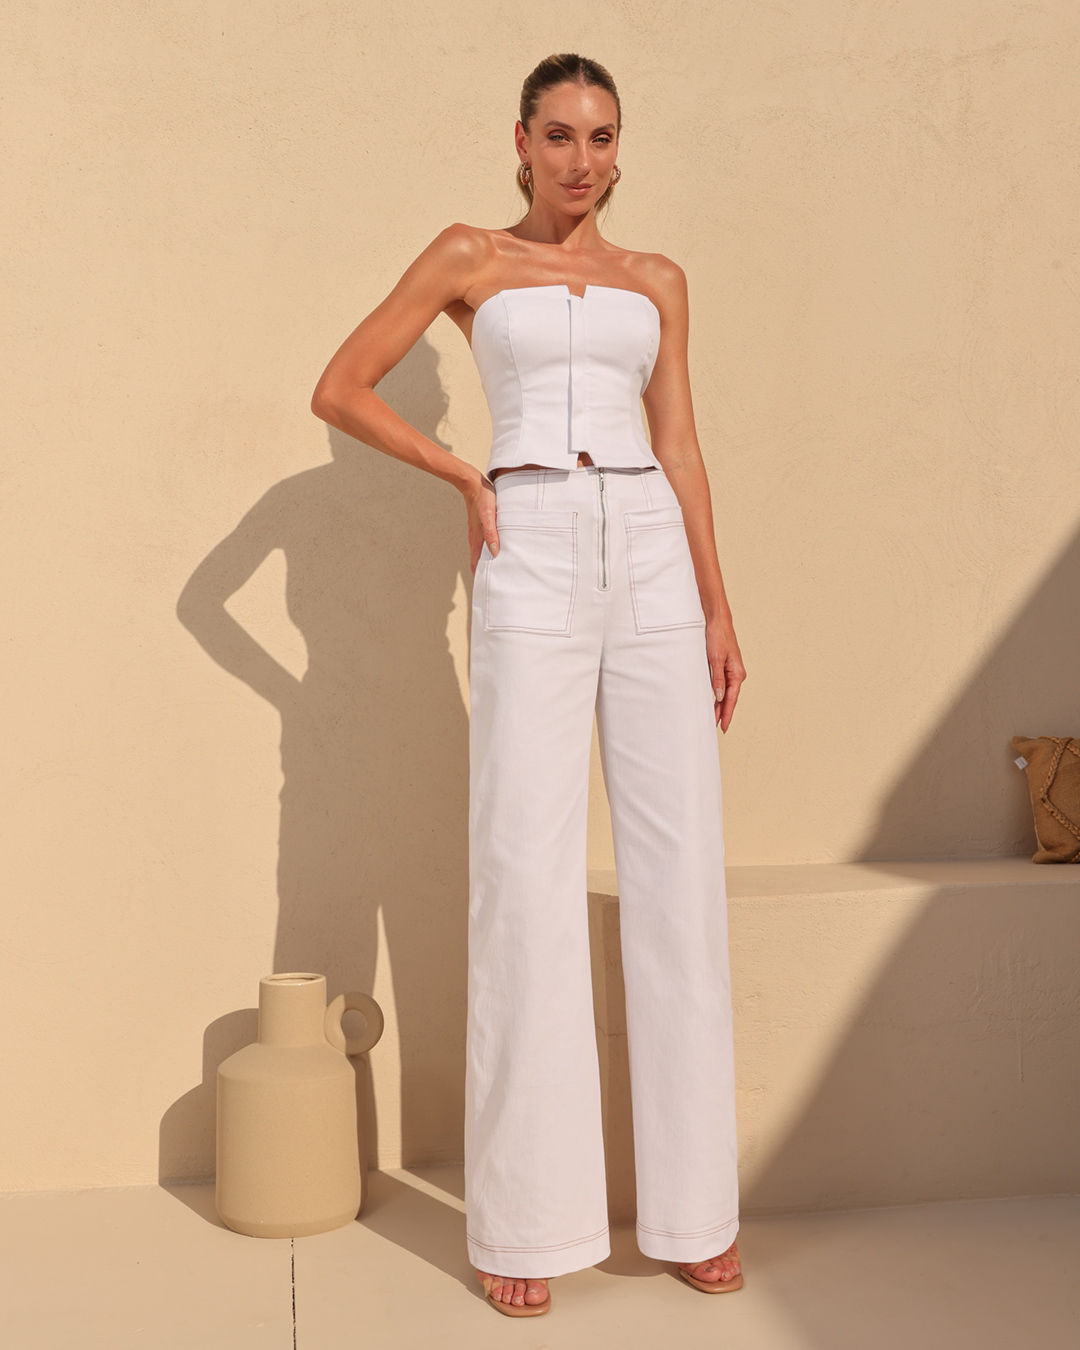 Dot Clothing - Conjunto Dot Clothing Jeans TMC Offwhite - 2105OFF